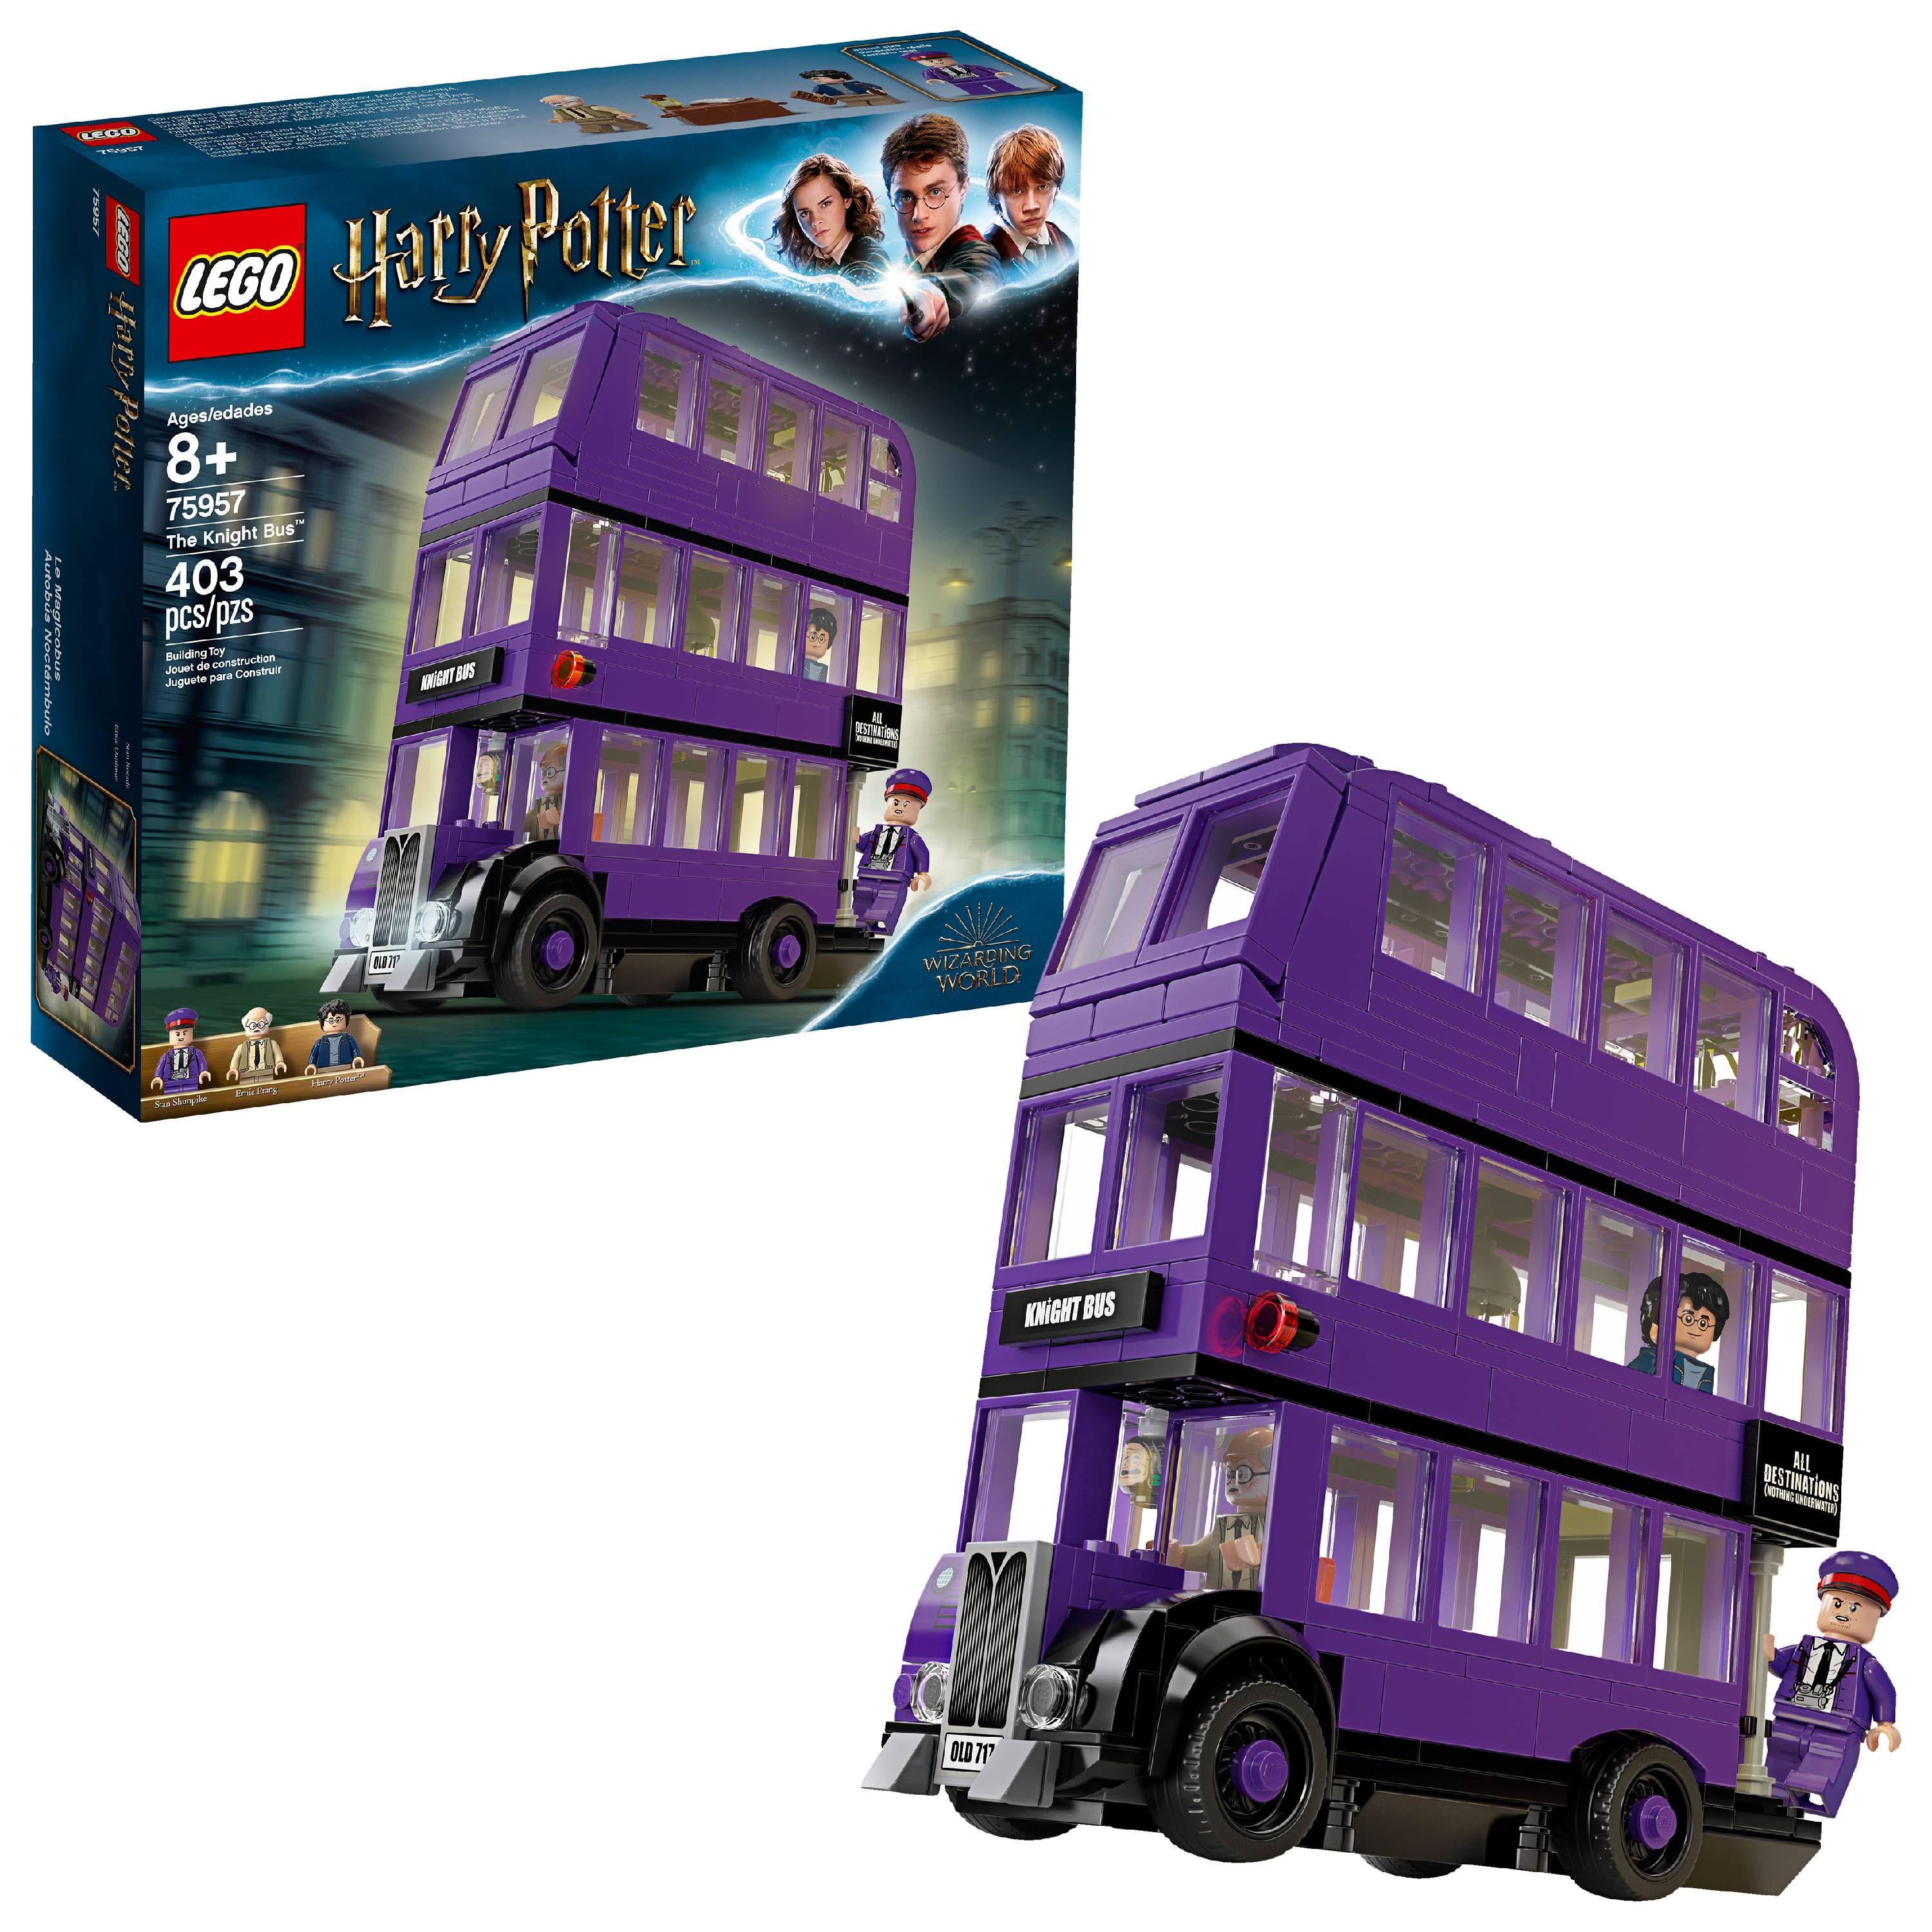 LEGO The Knight Bus 75957 Building Set (403 Pieces) - image 1 of 8